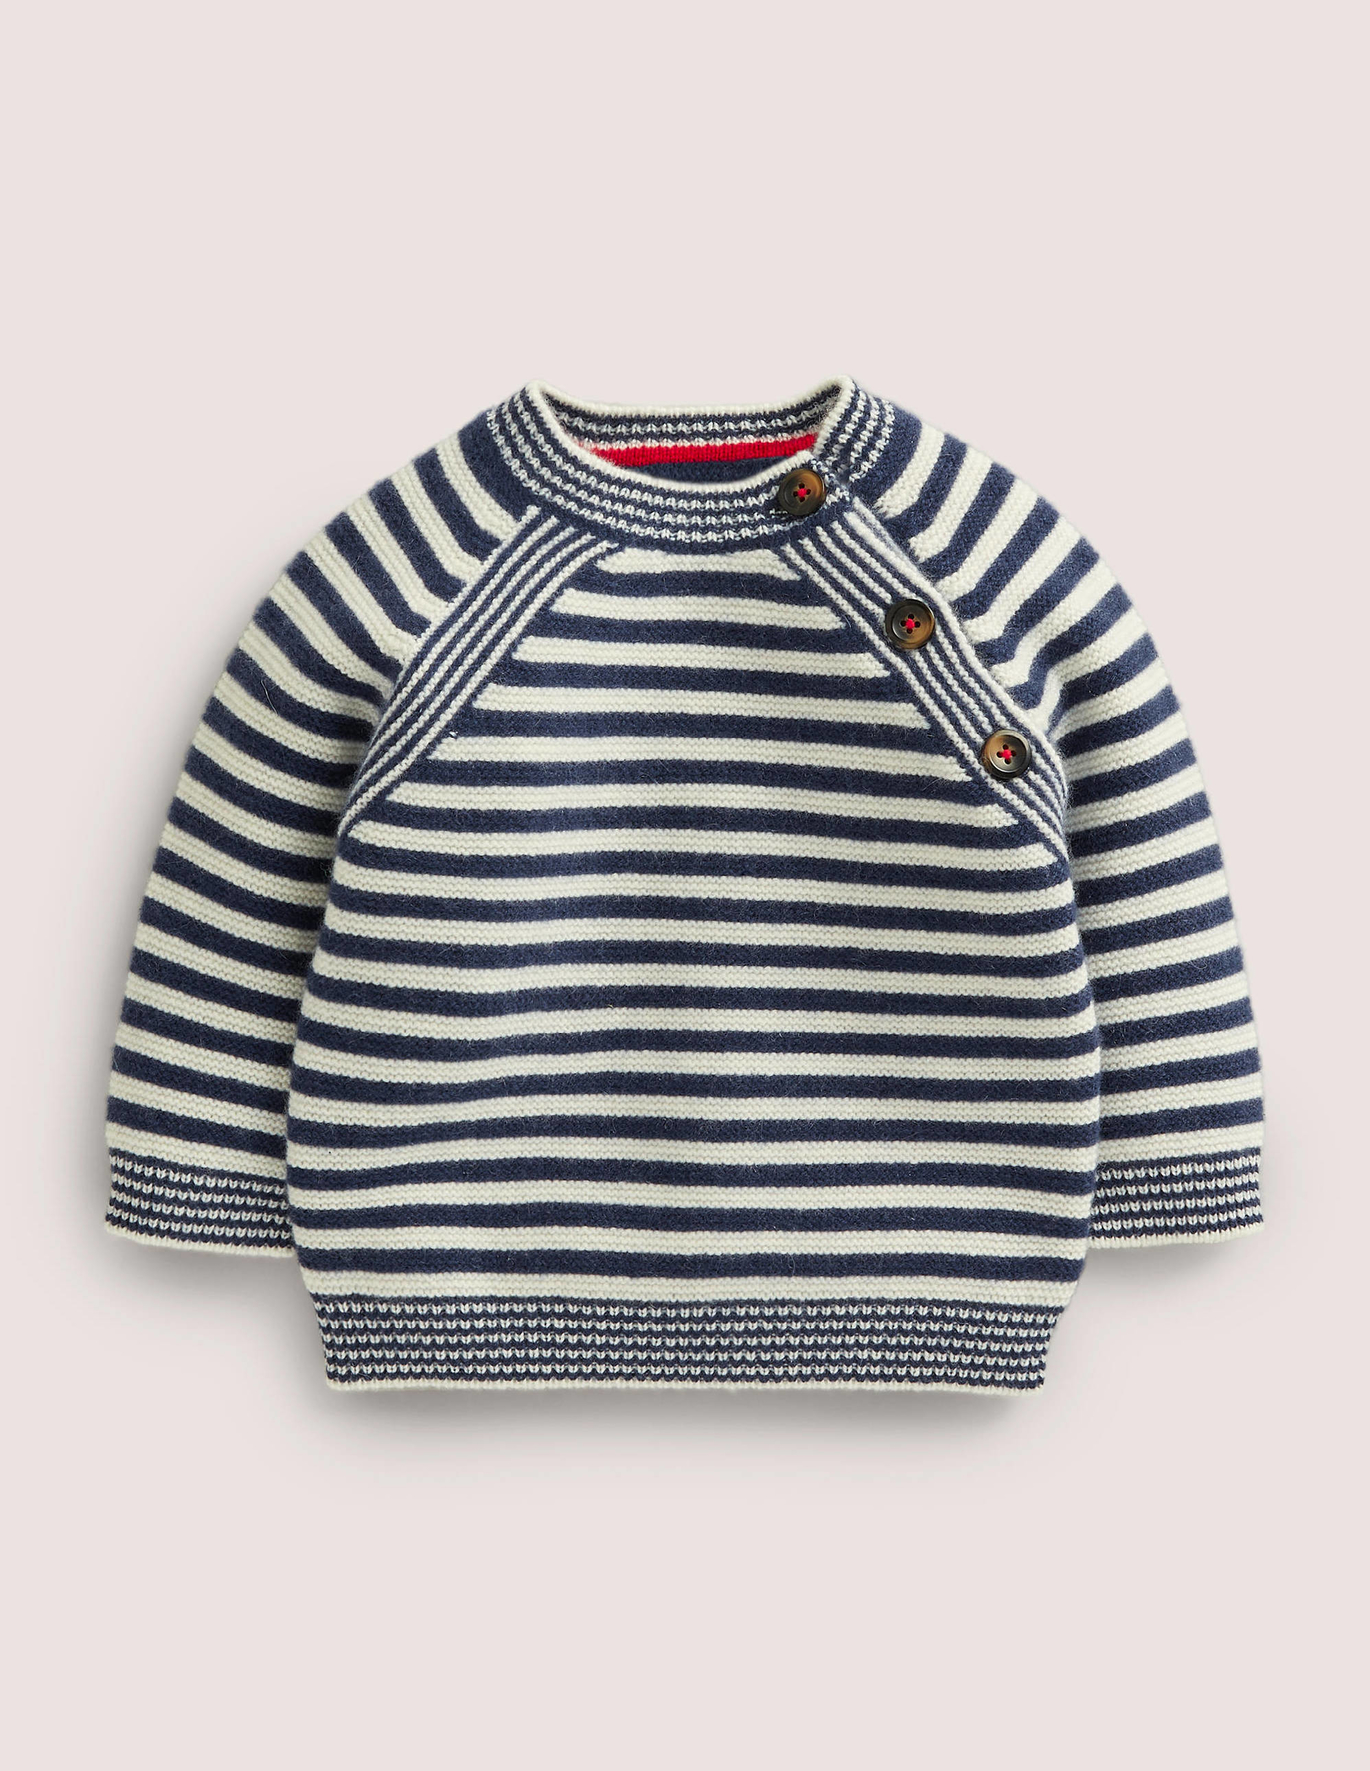 Boden Navy and White Striped Cashmere Sweater - Starboard